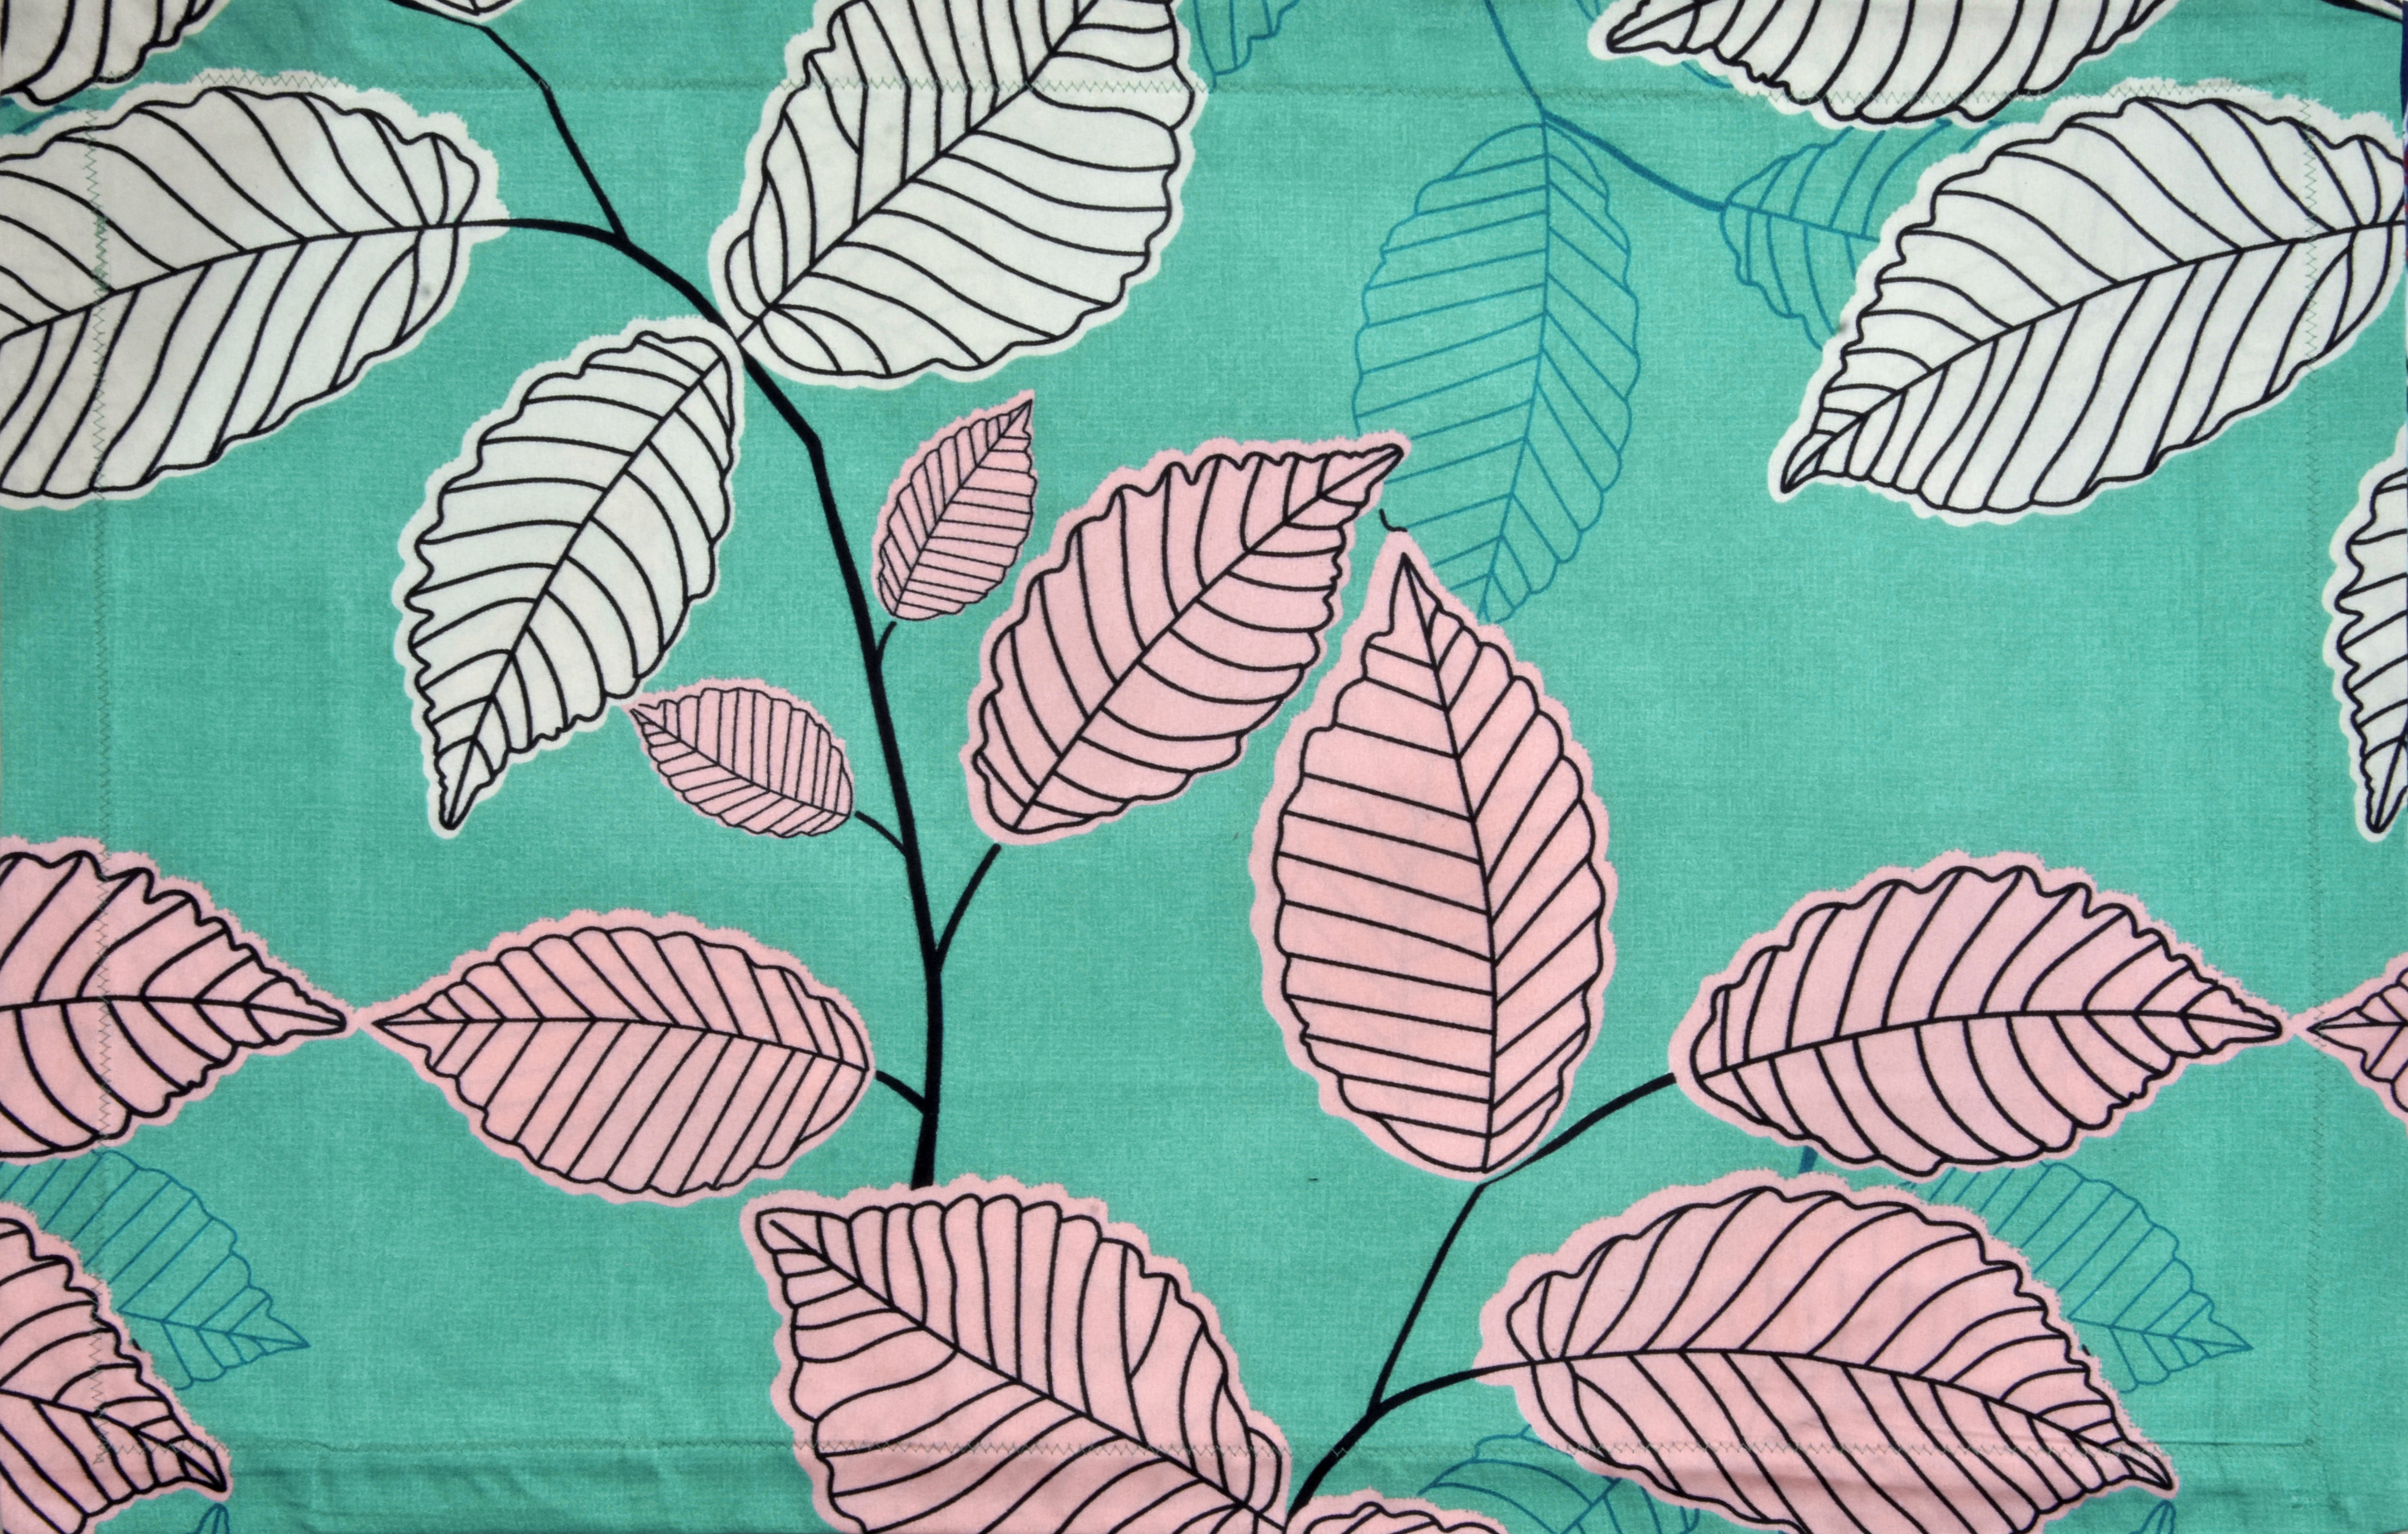 140 TC Glace Cotton Double Bed Green and Pink Leafs Design Bedsheet (90 In x 100 In) with 2 pillow cover 5